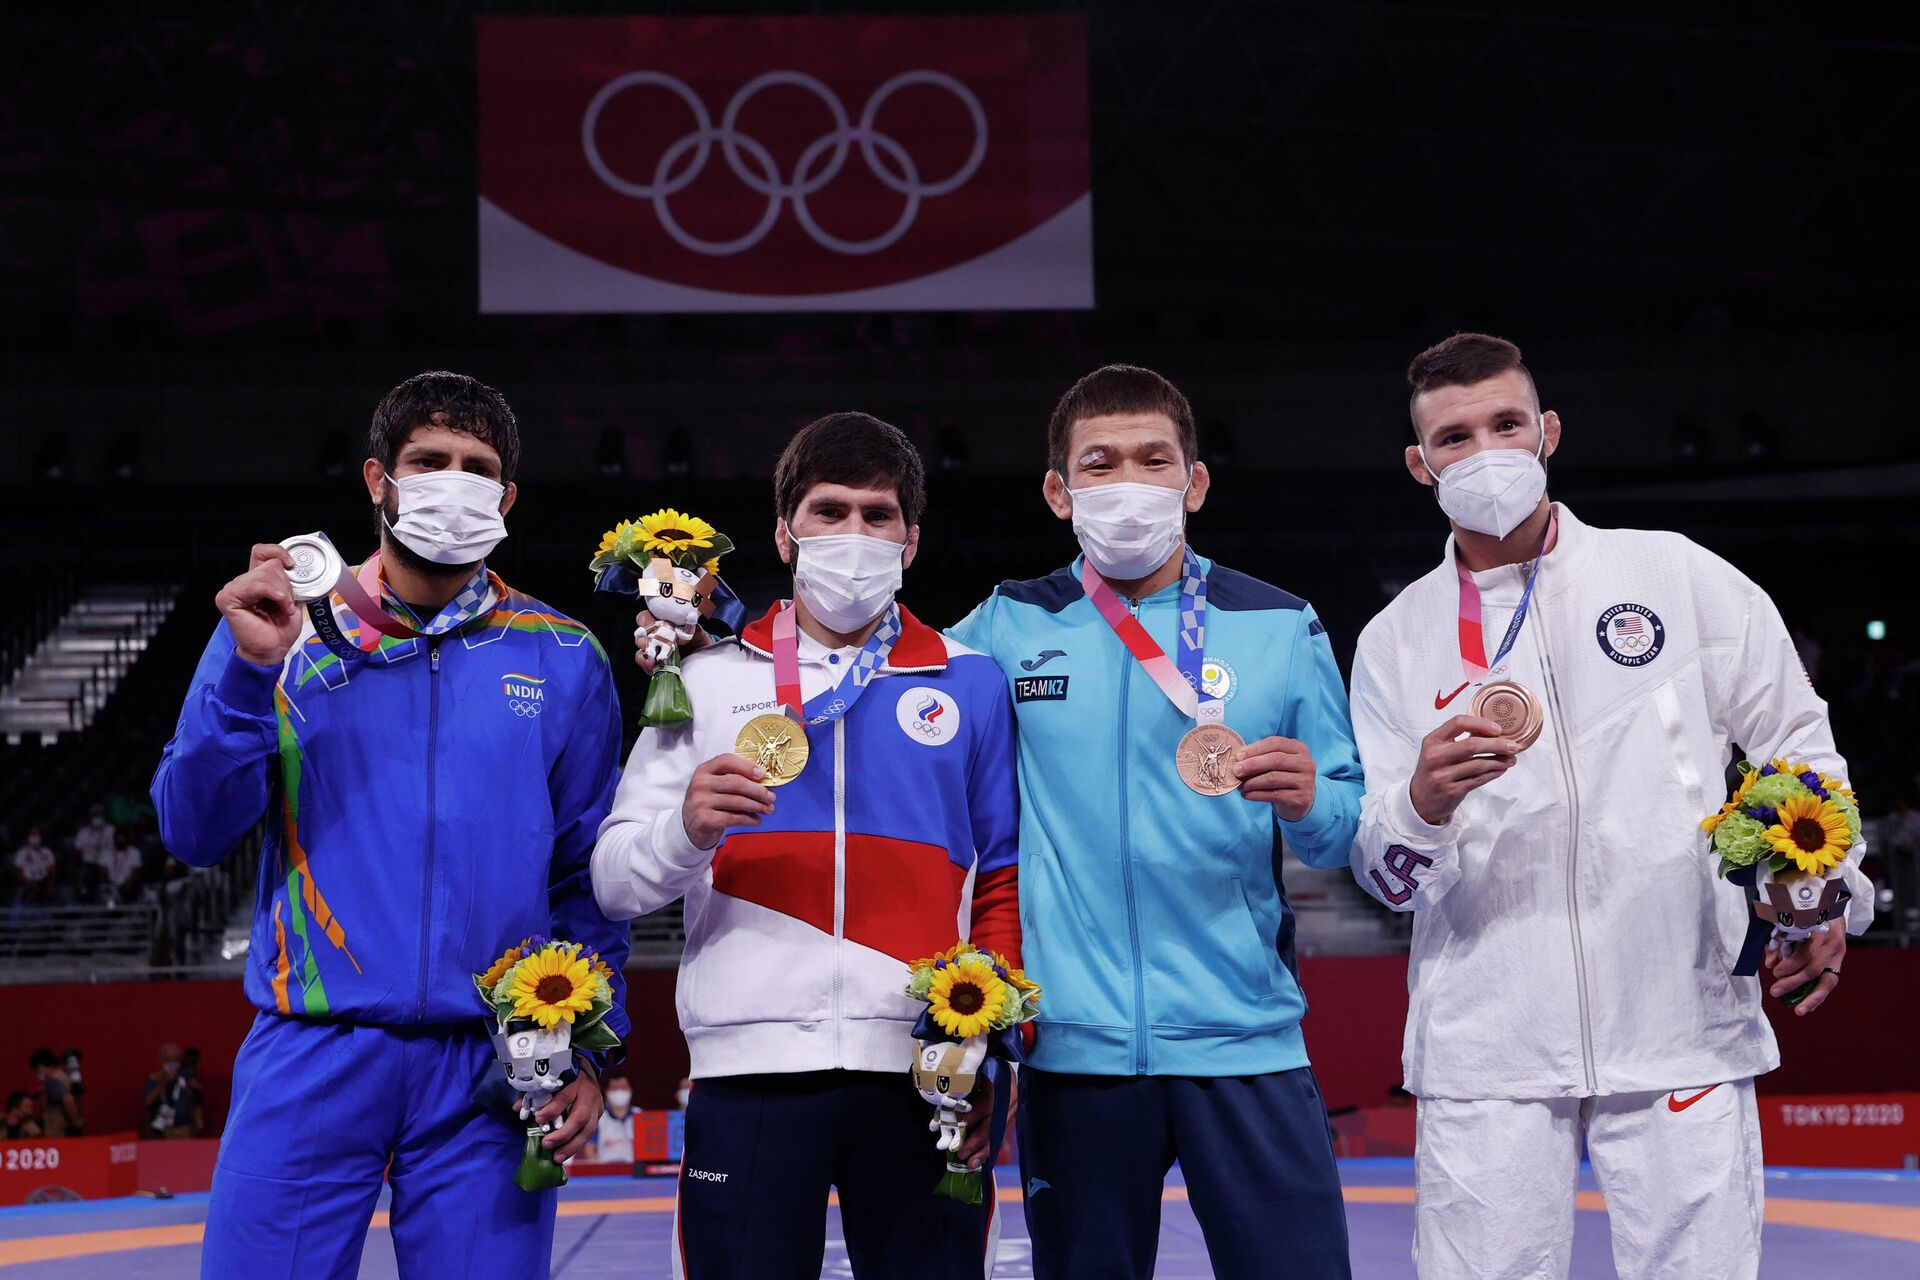 Silver medalist India's Kumar Ravi, gold medalist Russia's Zavur Uguev, bronze medalist Kazakhstan's Nurislam Sanayev and bronze medalist USA's Thomas Patrick Gilman pose with their medals after the men's freestyle 57kg wrestling competition of the Tokyo 2020 Olympic Games at the Makuhari Messe in Tokyo on August 5, 2021 - Sputnik International, 1920, 22.06.2022